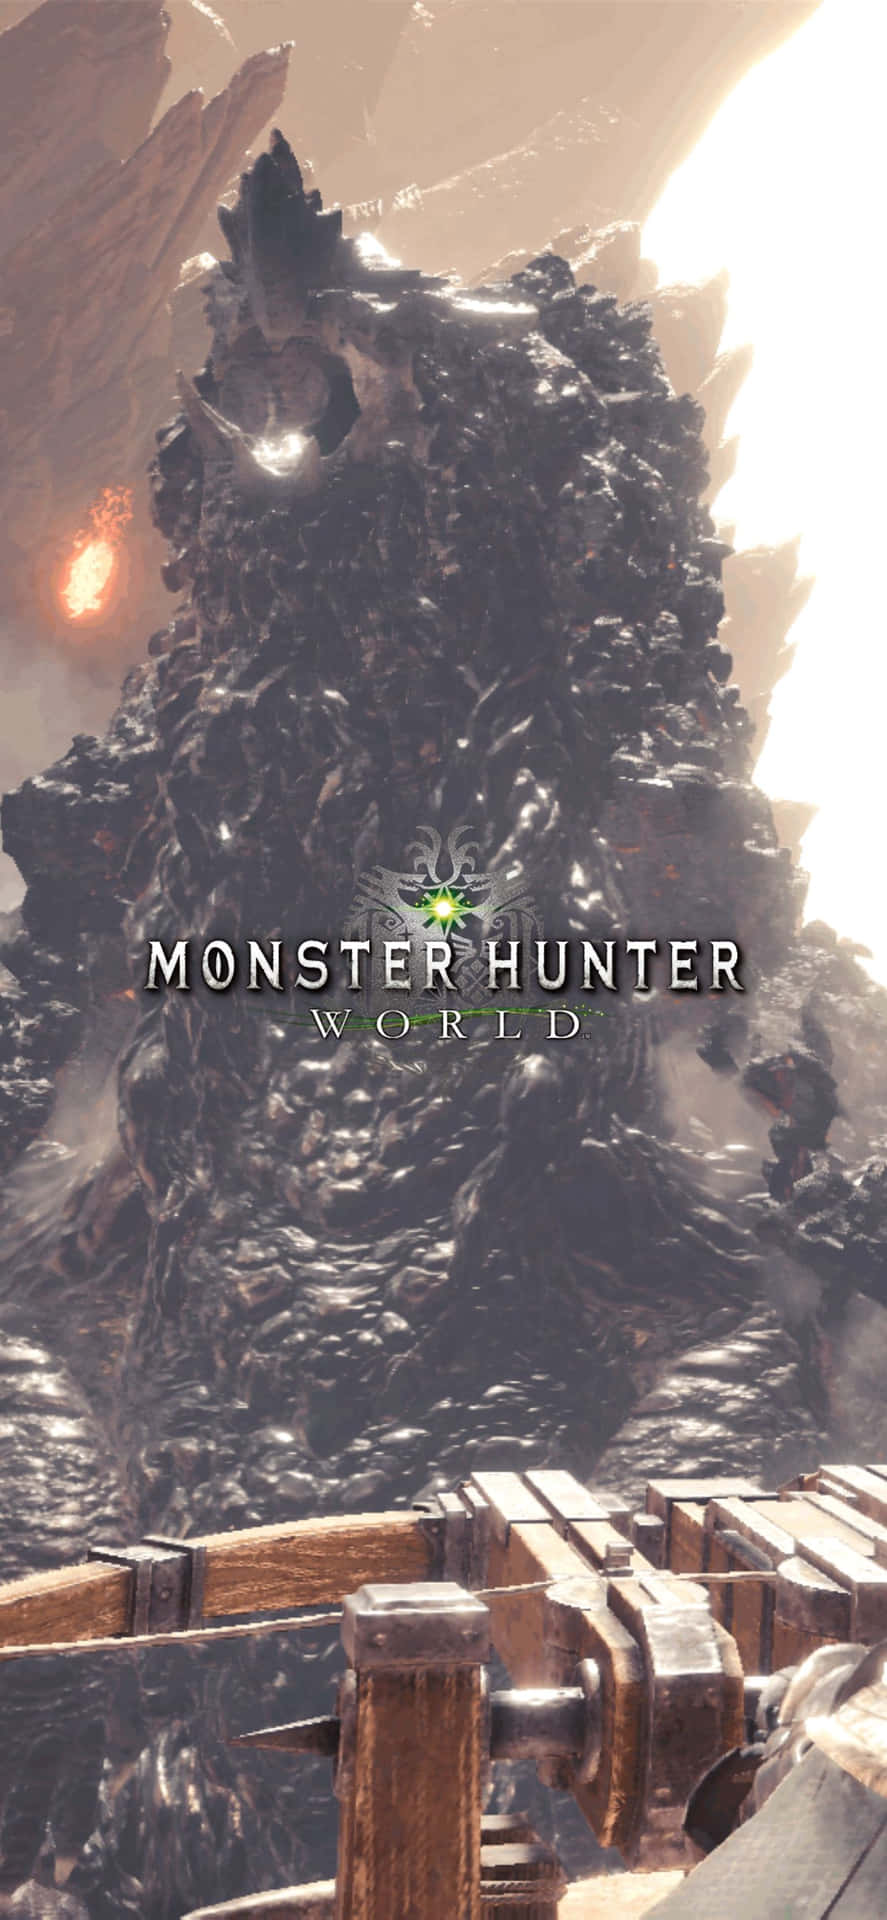 Iphone Xs Max Monster Hunter World Background 1242 X 2688 Background